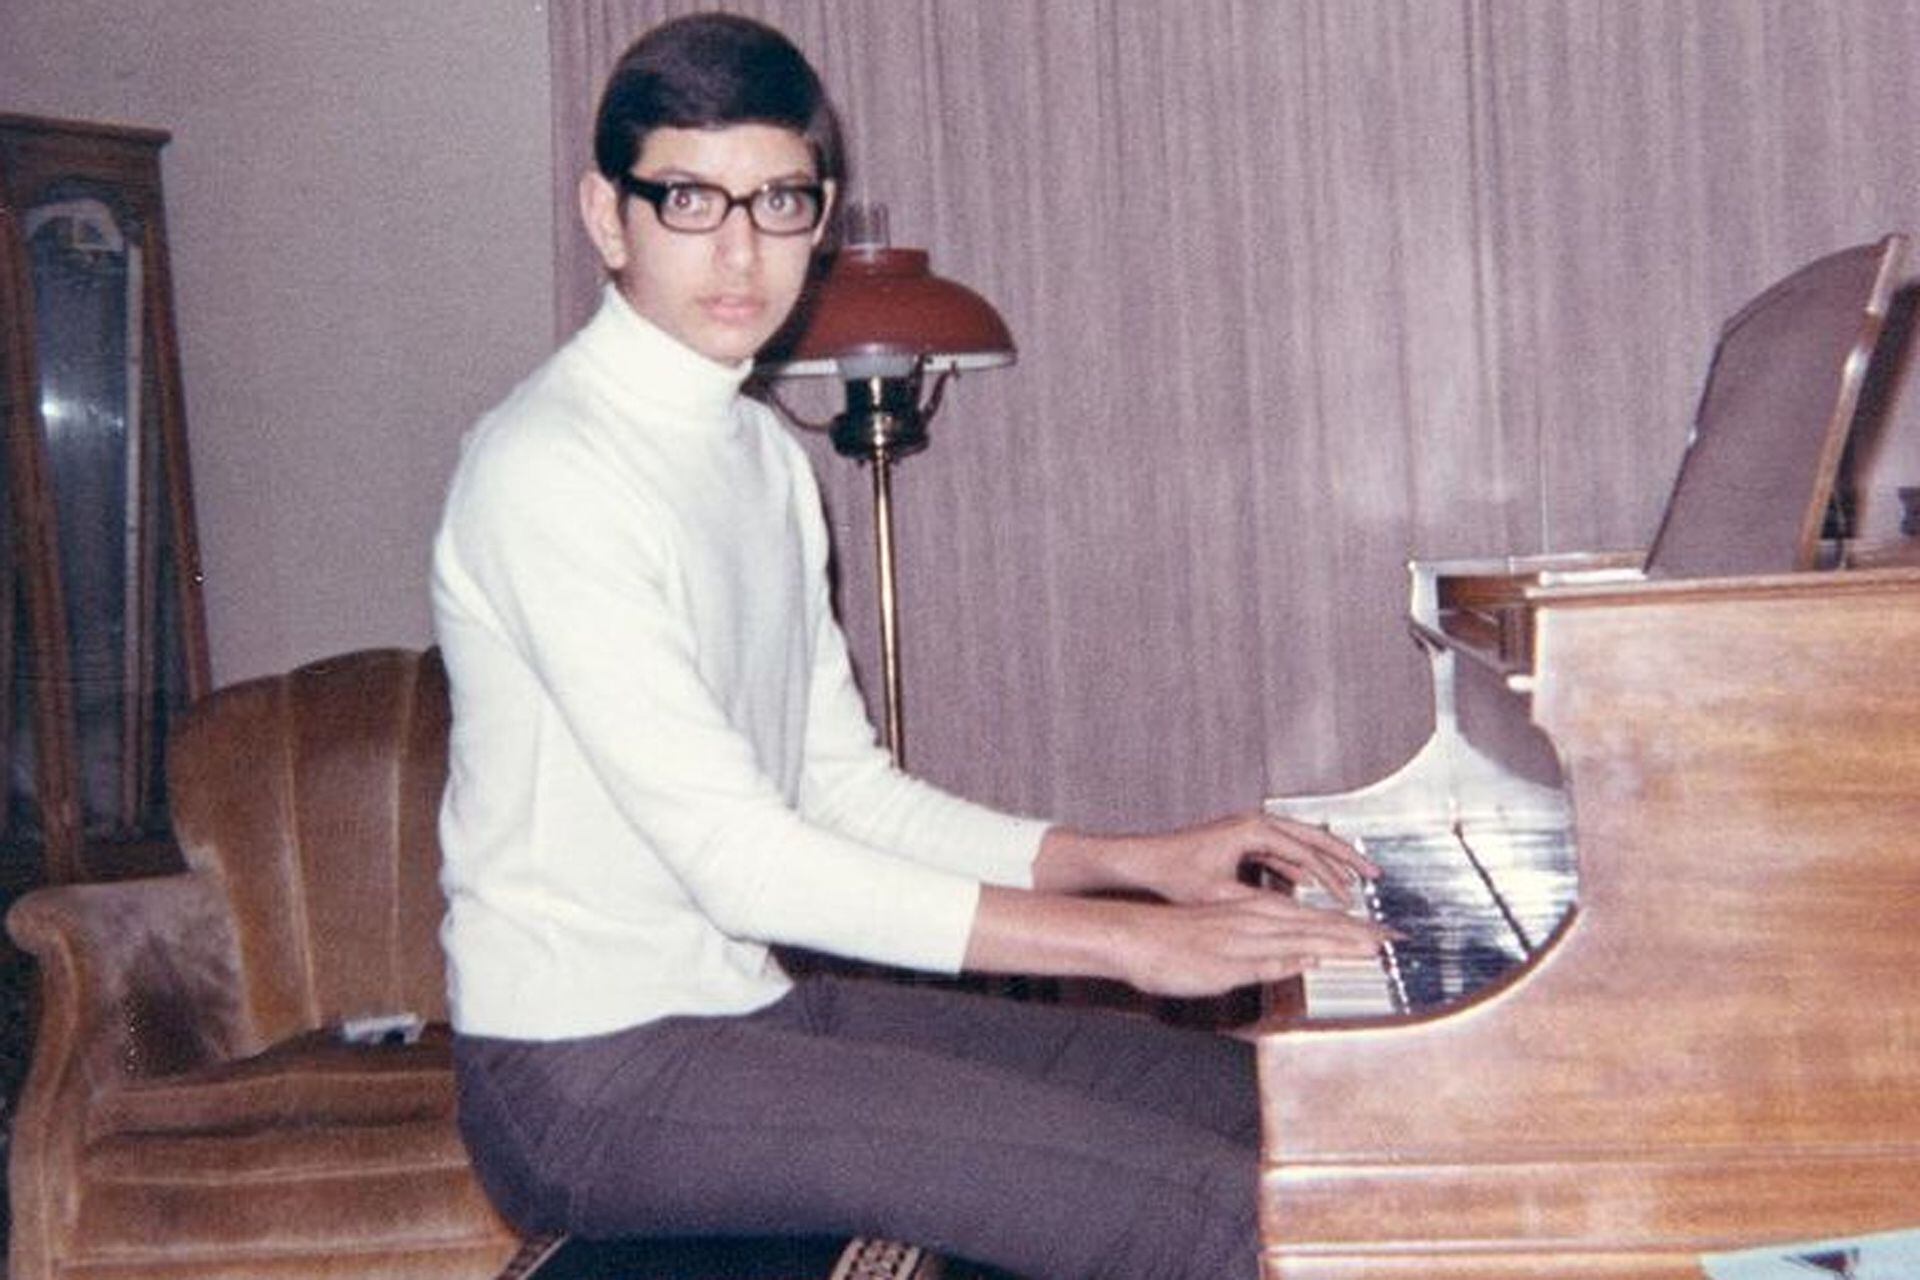 Jeff Goldblum, as a young man, in front of a piano